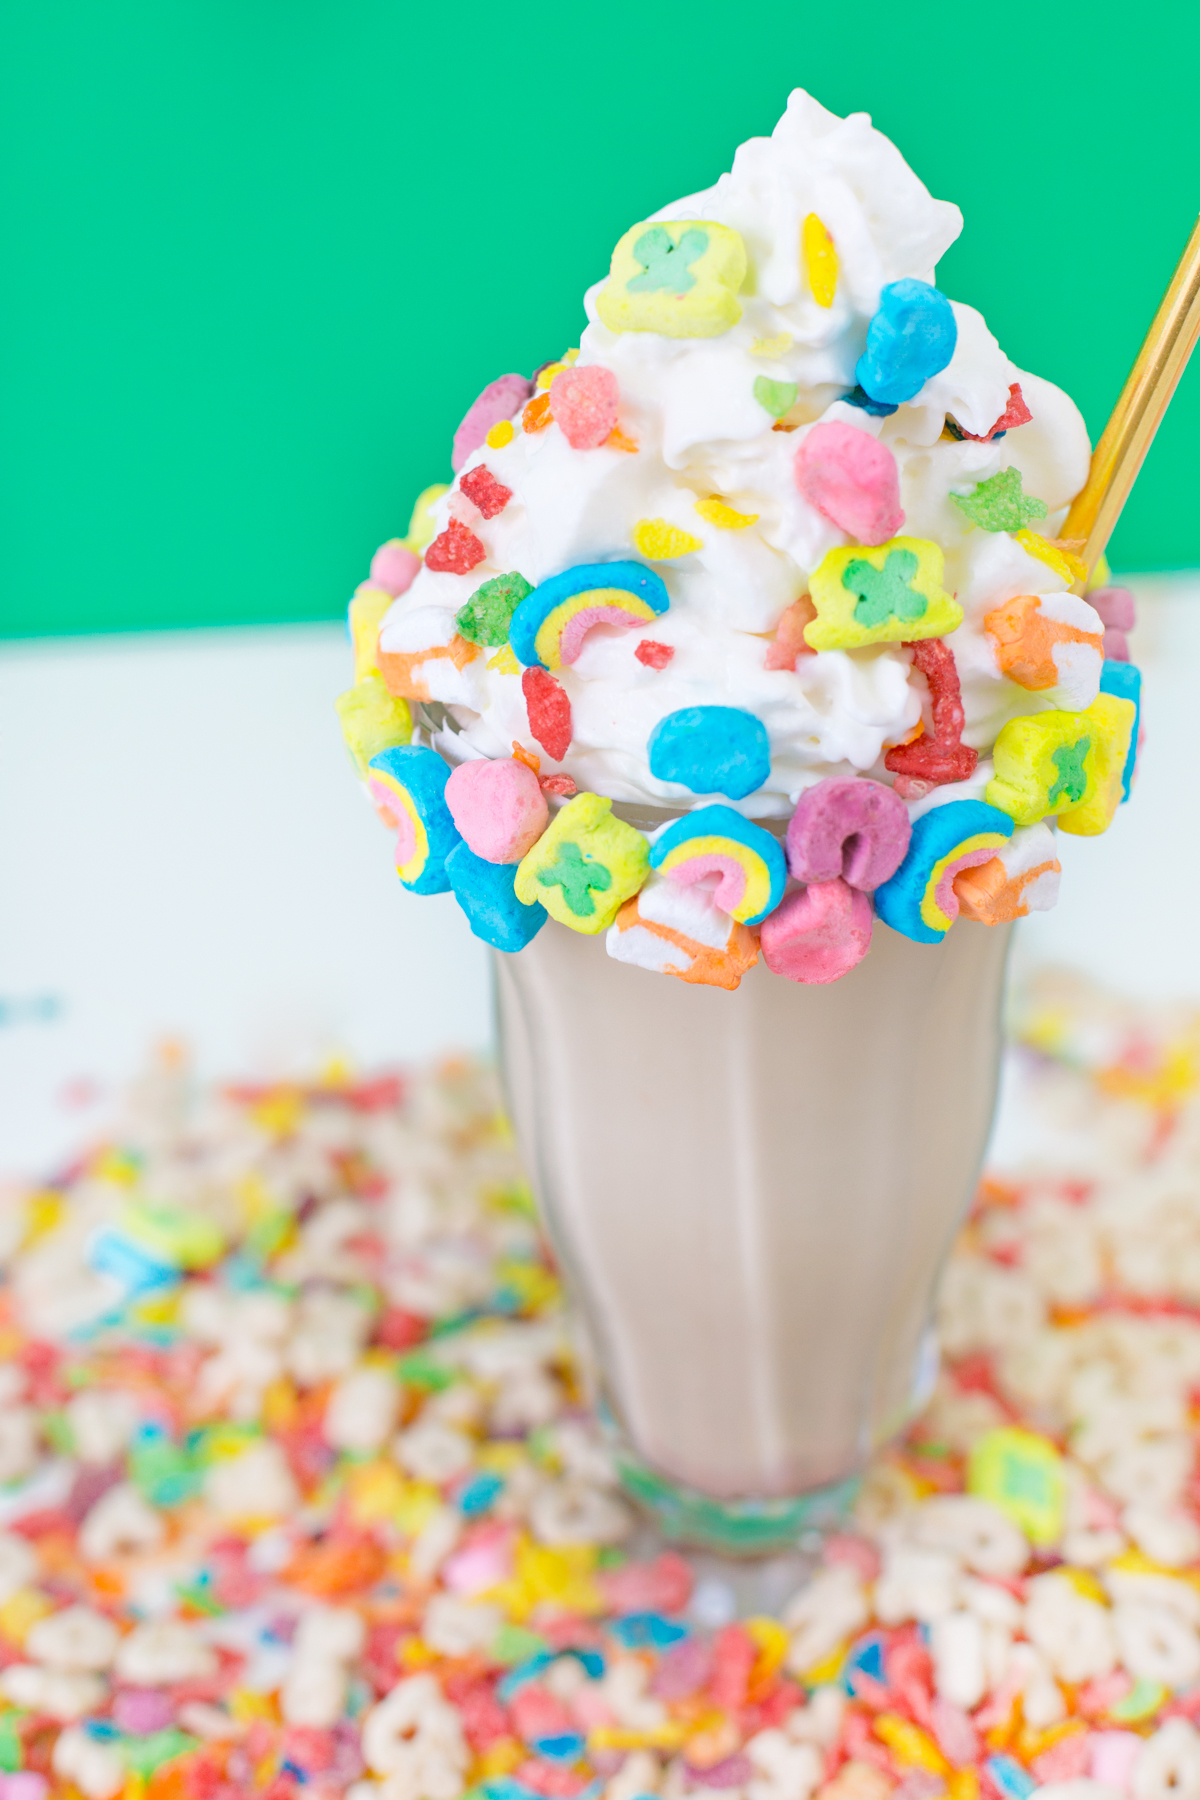 Colorful Cereal - Rainbow Cereal In Cone , HD Wallpaper & Backgrounds